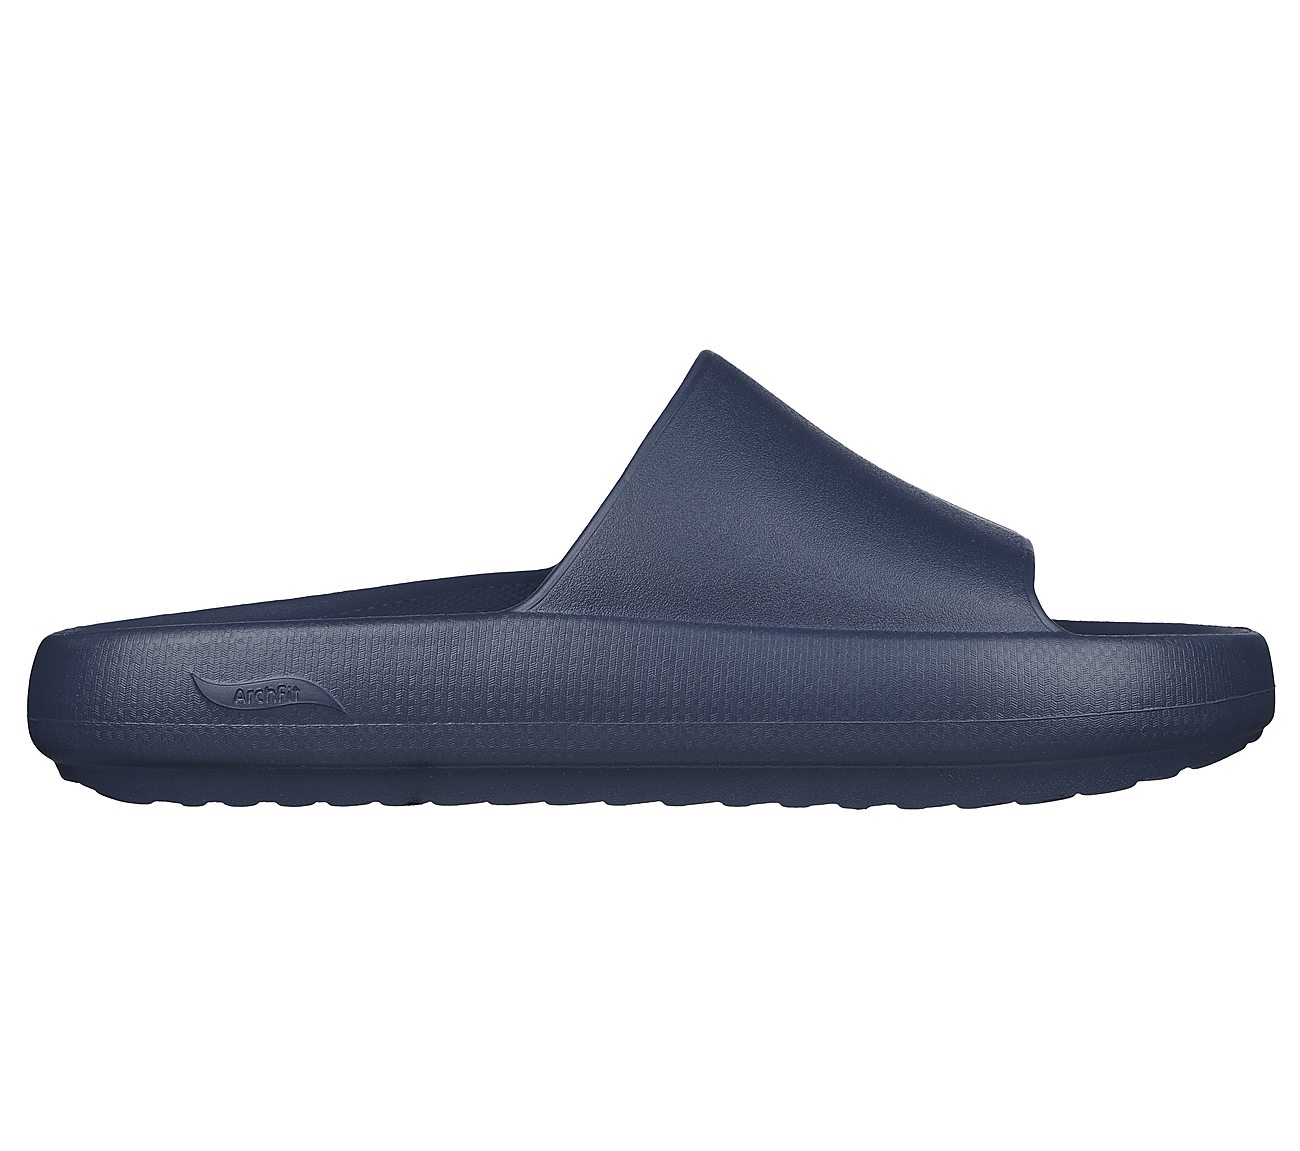 ARCH FIT HORIZON, SLATE Footwear Lateral View